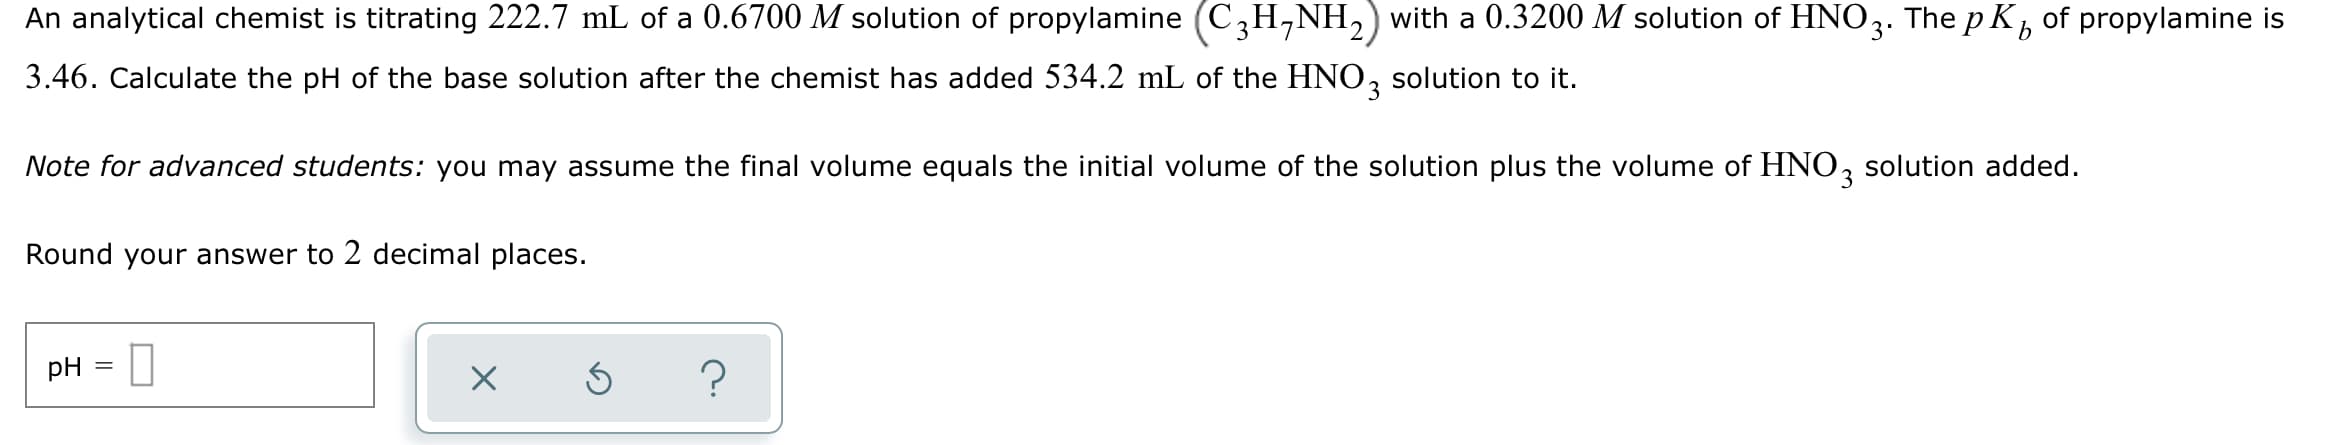 An analytical chemist is titrating 222.7 mL of a 0.6700 M solution of propylamine (C,H,NH,) with a 0.3200 M solution of
HNO3.
The p Kb
of propylamine is
3.46. Calculate the pH of the base solution after the chemist has added 534.2 mL of the HNO, solution to it.
3.
Note for advanced students: you may assume the final volume equals the initial volume of the solution plus the volume of HNO, solution added.
3
Round your answer to 2 decimal places.
